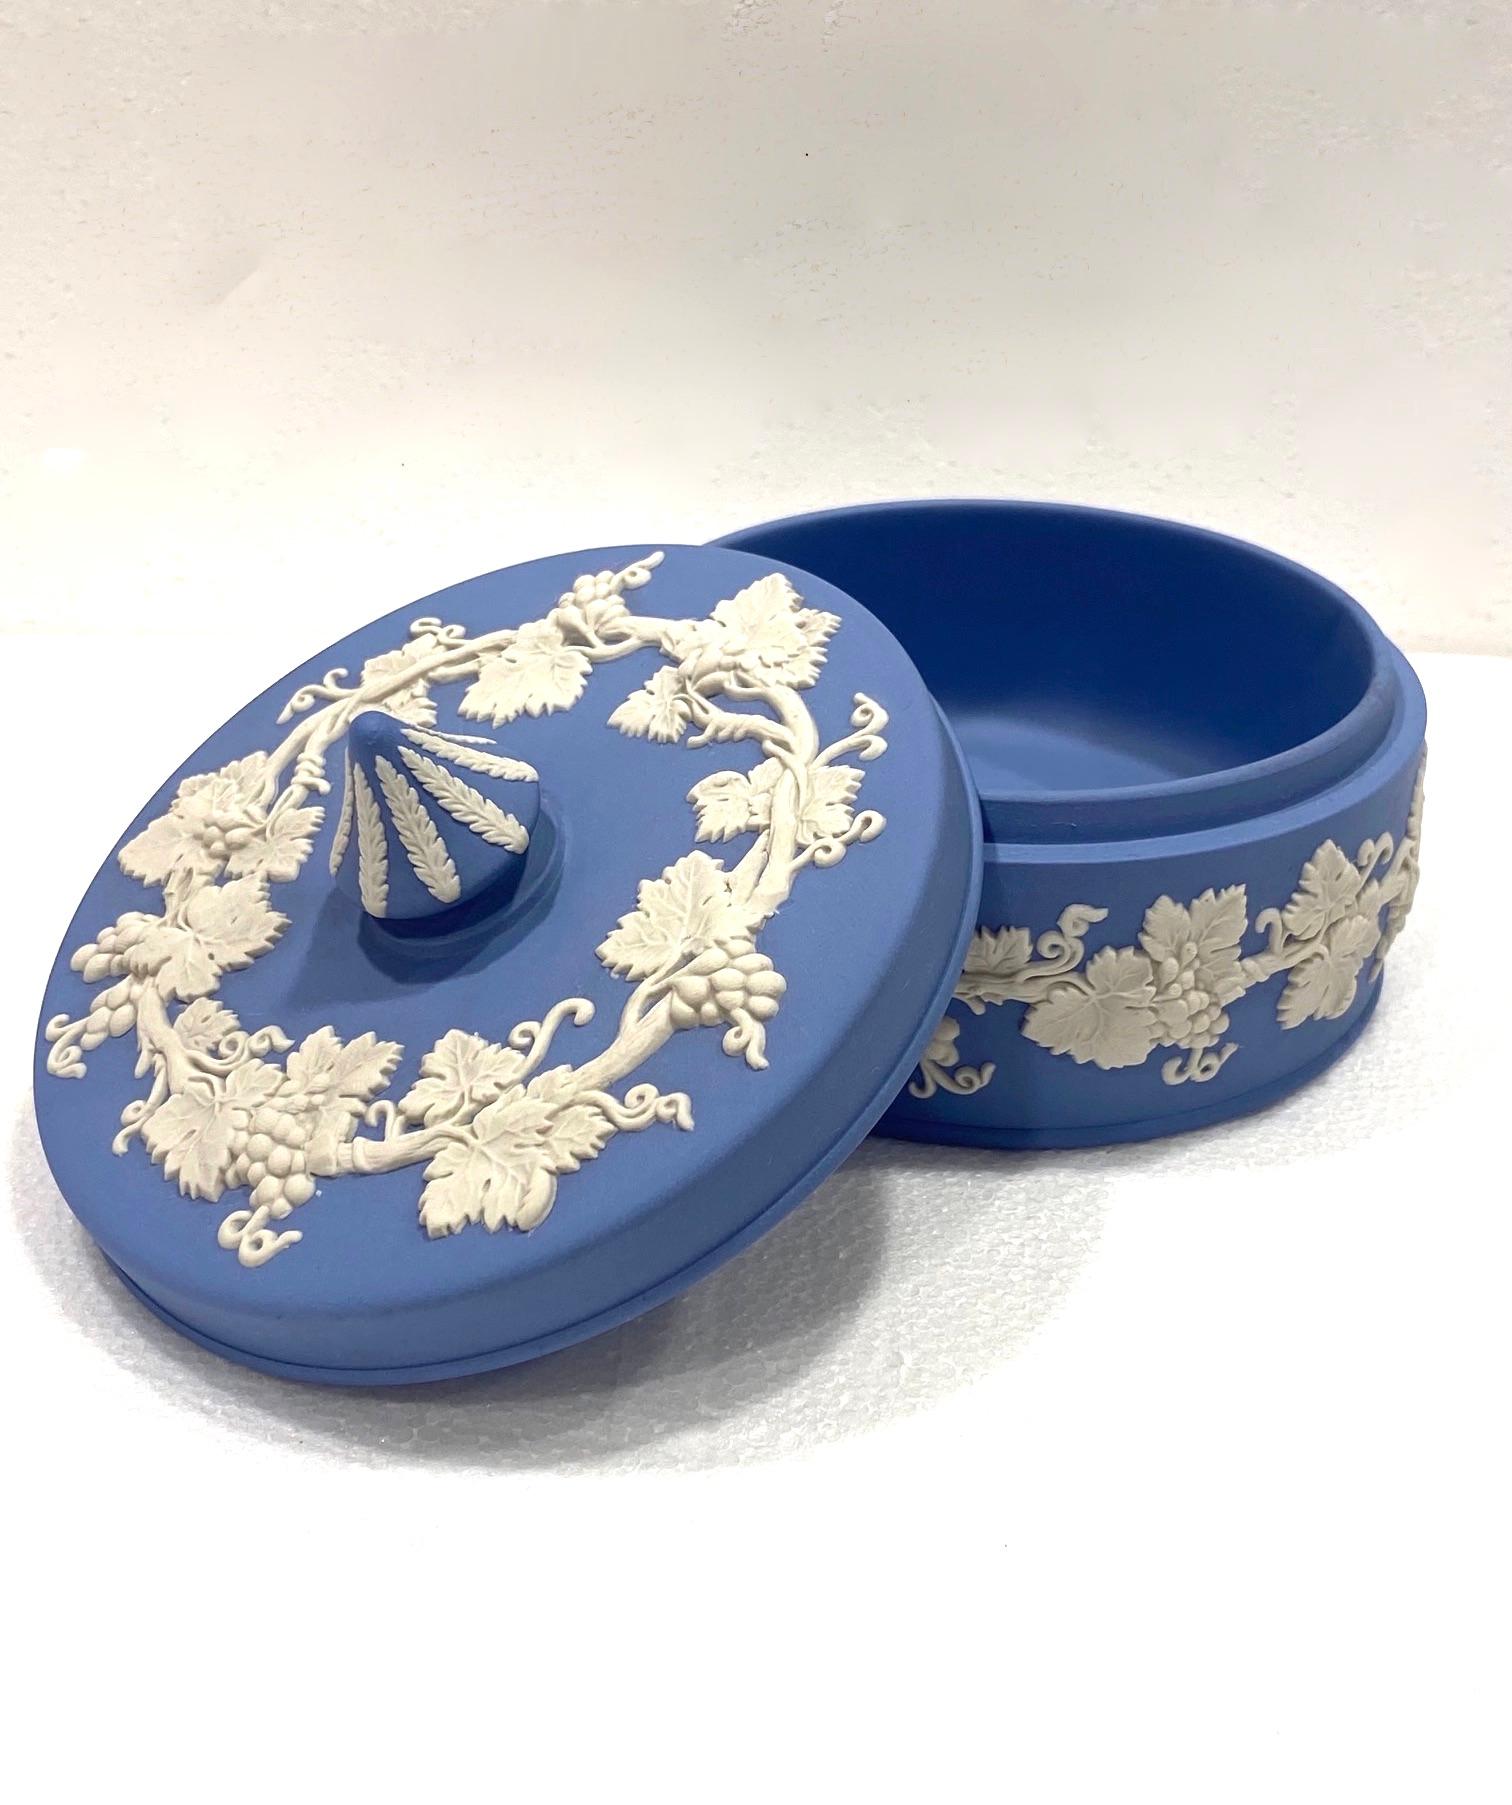 Etched Vintage Wedgwood Jasperware Neoclassical Lidded Box, England, Early 20th C.